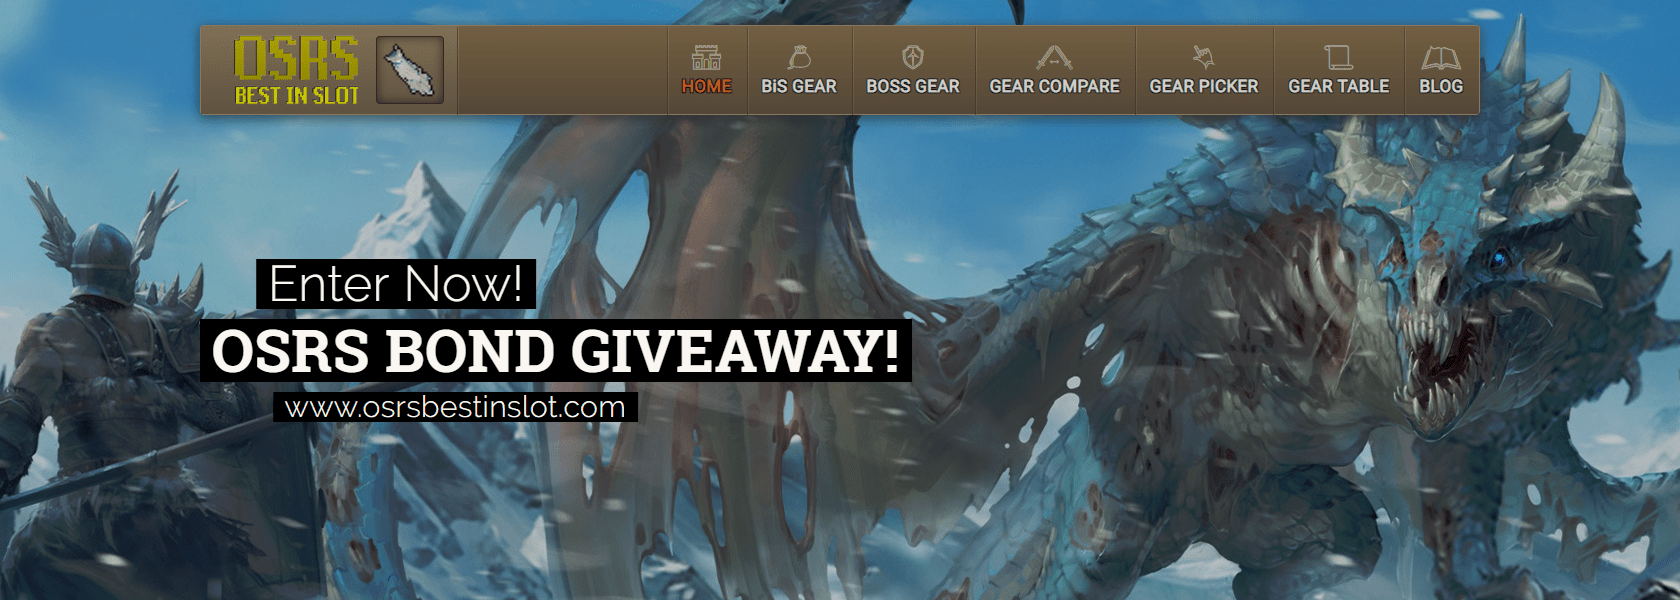 New Site Giveaway! - OSRS Best in Slot